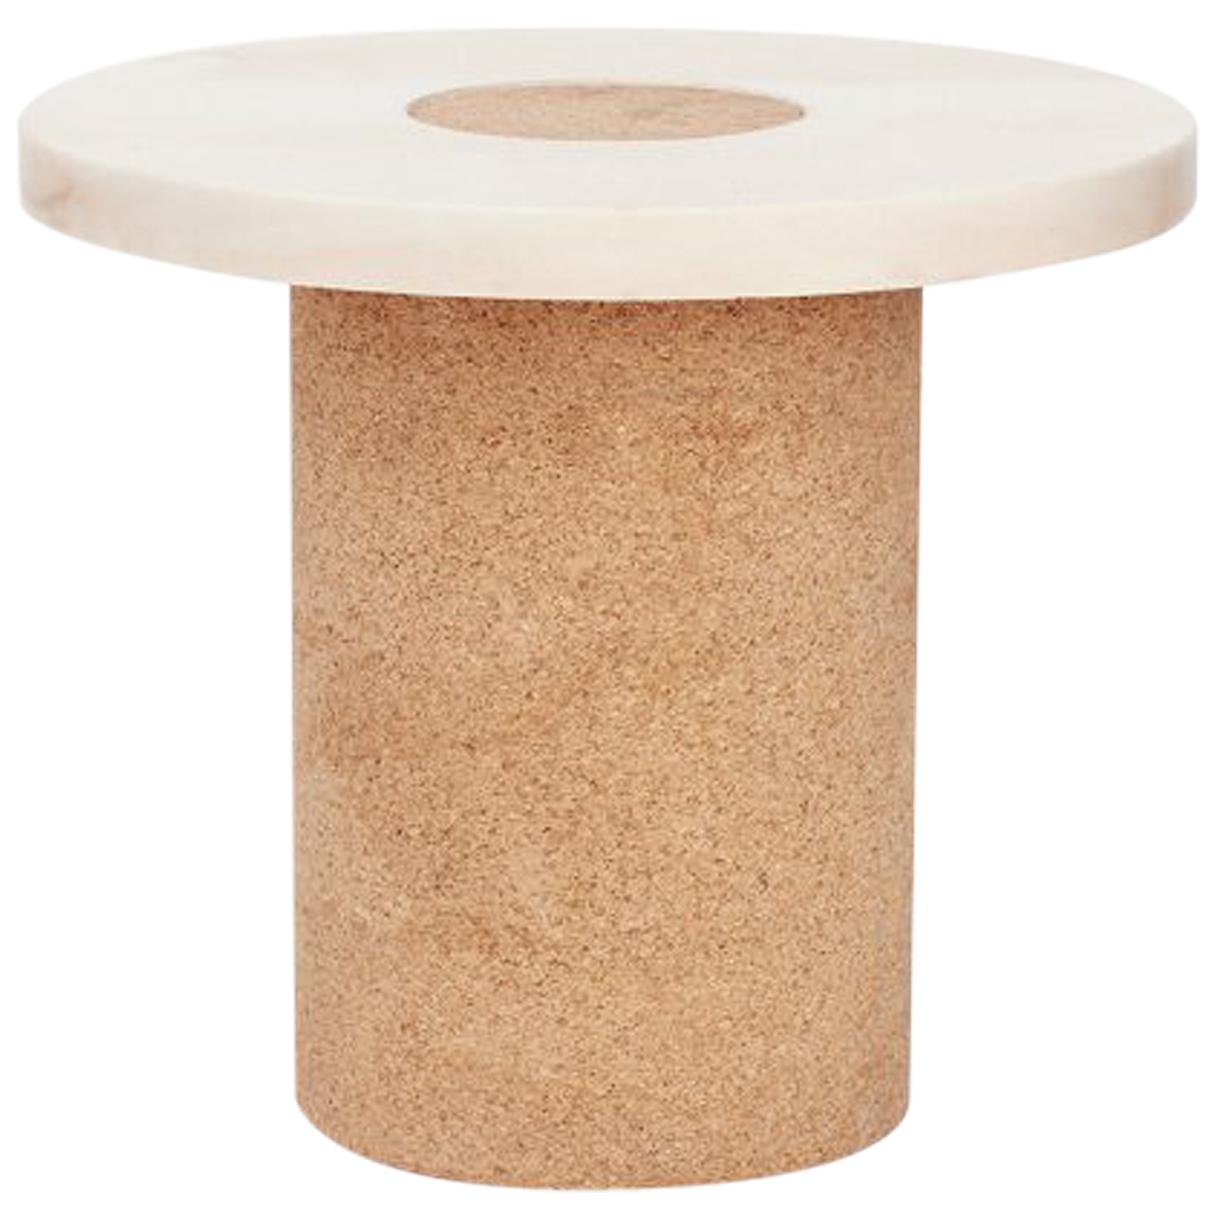 FRAMA Contemporary Sintra Table Small with White Marble and Natural Cork